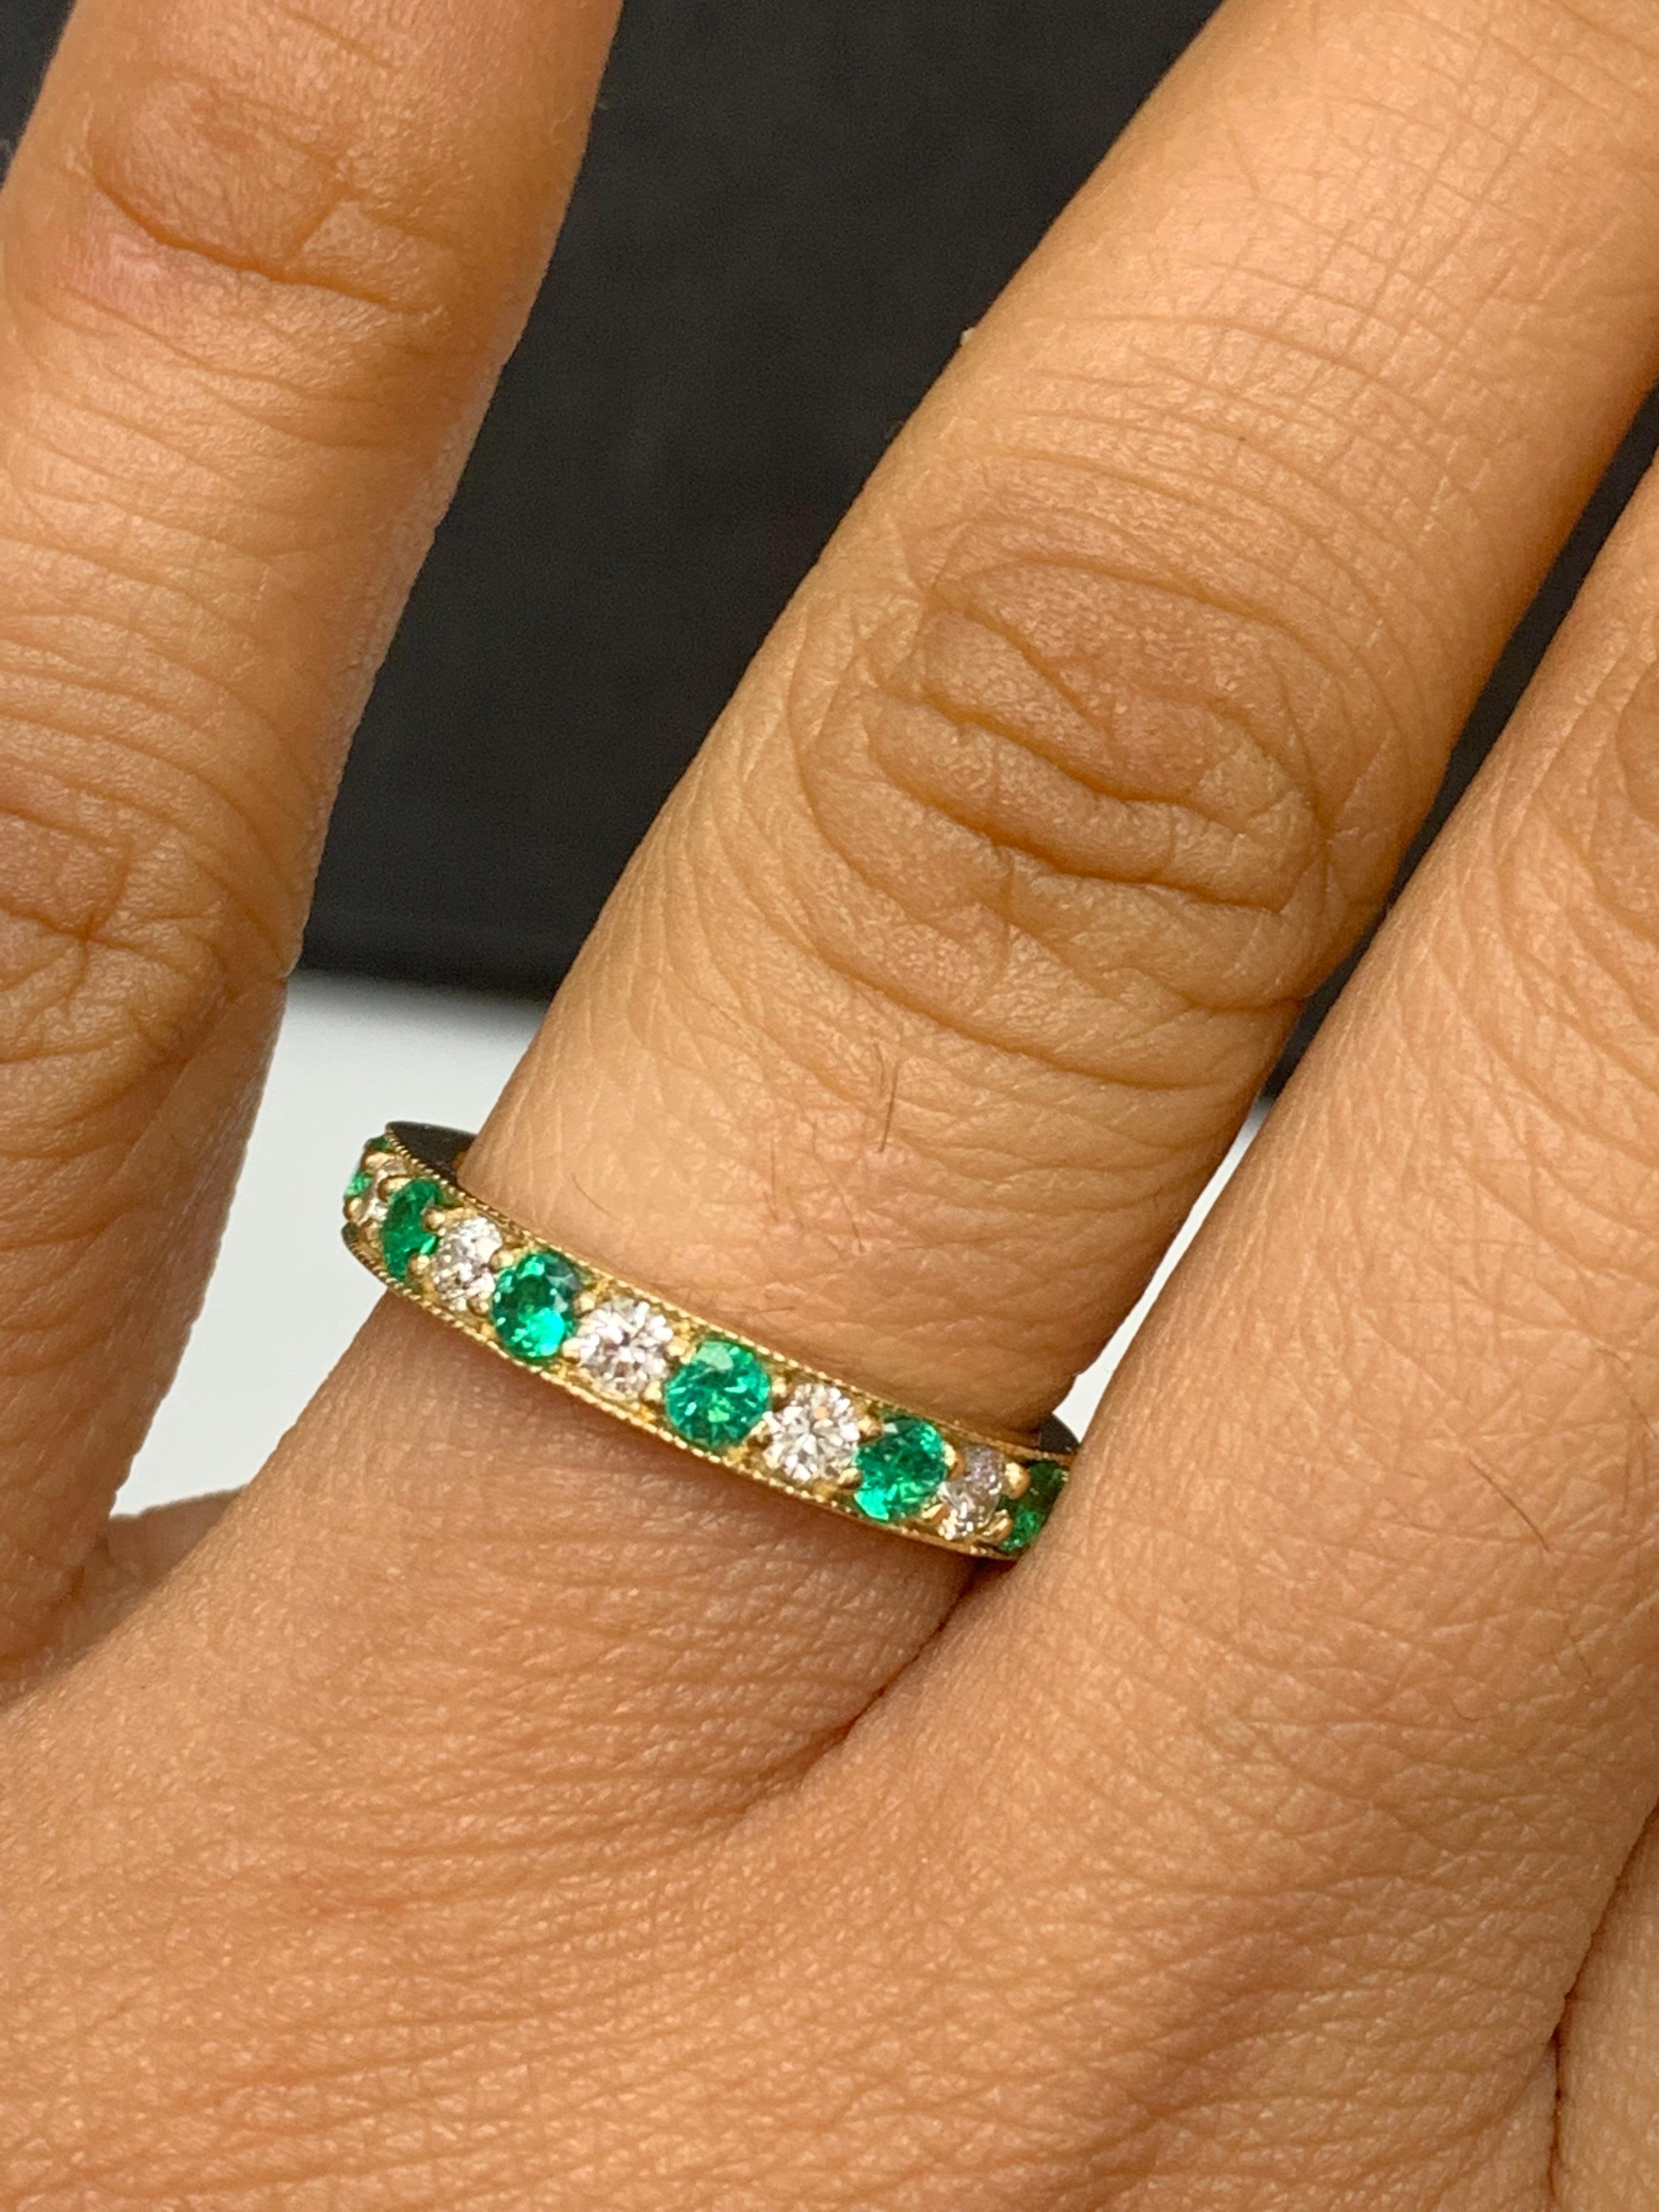 Handcrafted to perfection; showcasing color-rich brilliant-cut emeralds that elegantly alternate brilliant-cut diamonds in an 14k yellow gold setting. 
The 7 Emeralds weigh 0.58 carats total and 6 diamonds weigh 0.30 carats total.

Size 6.5 US